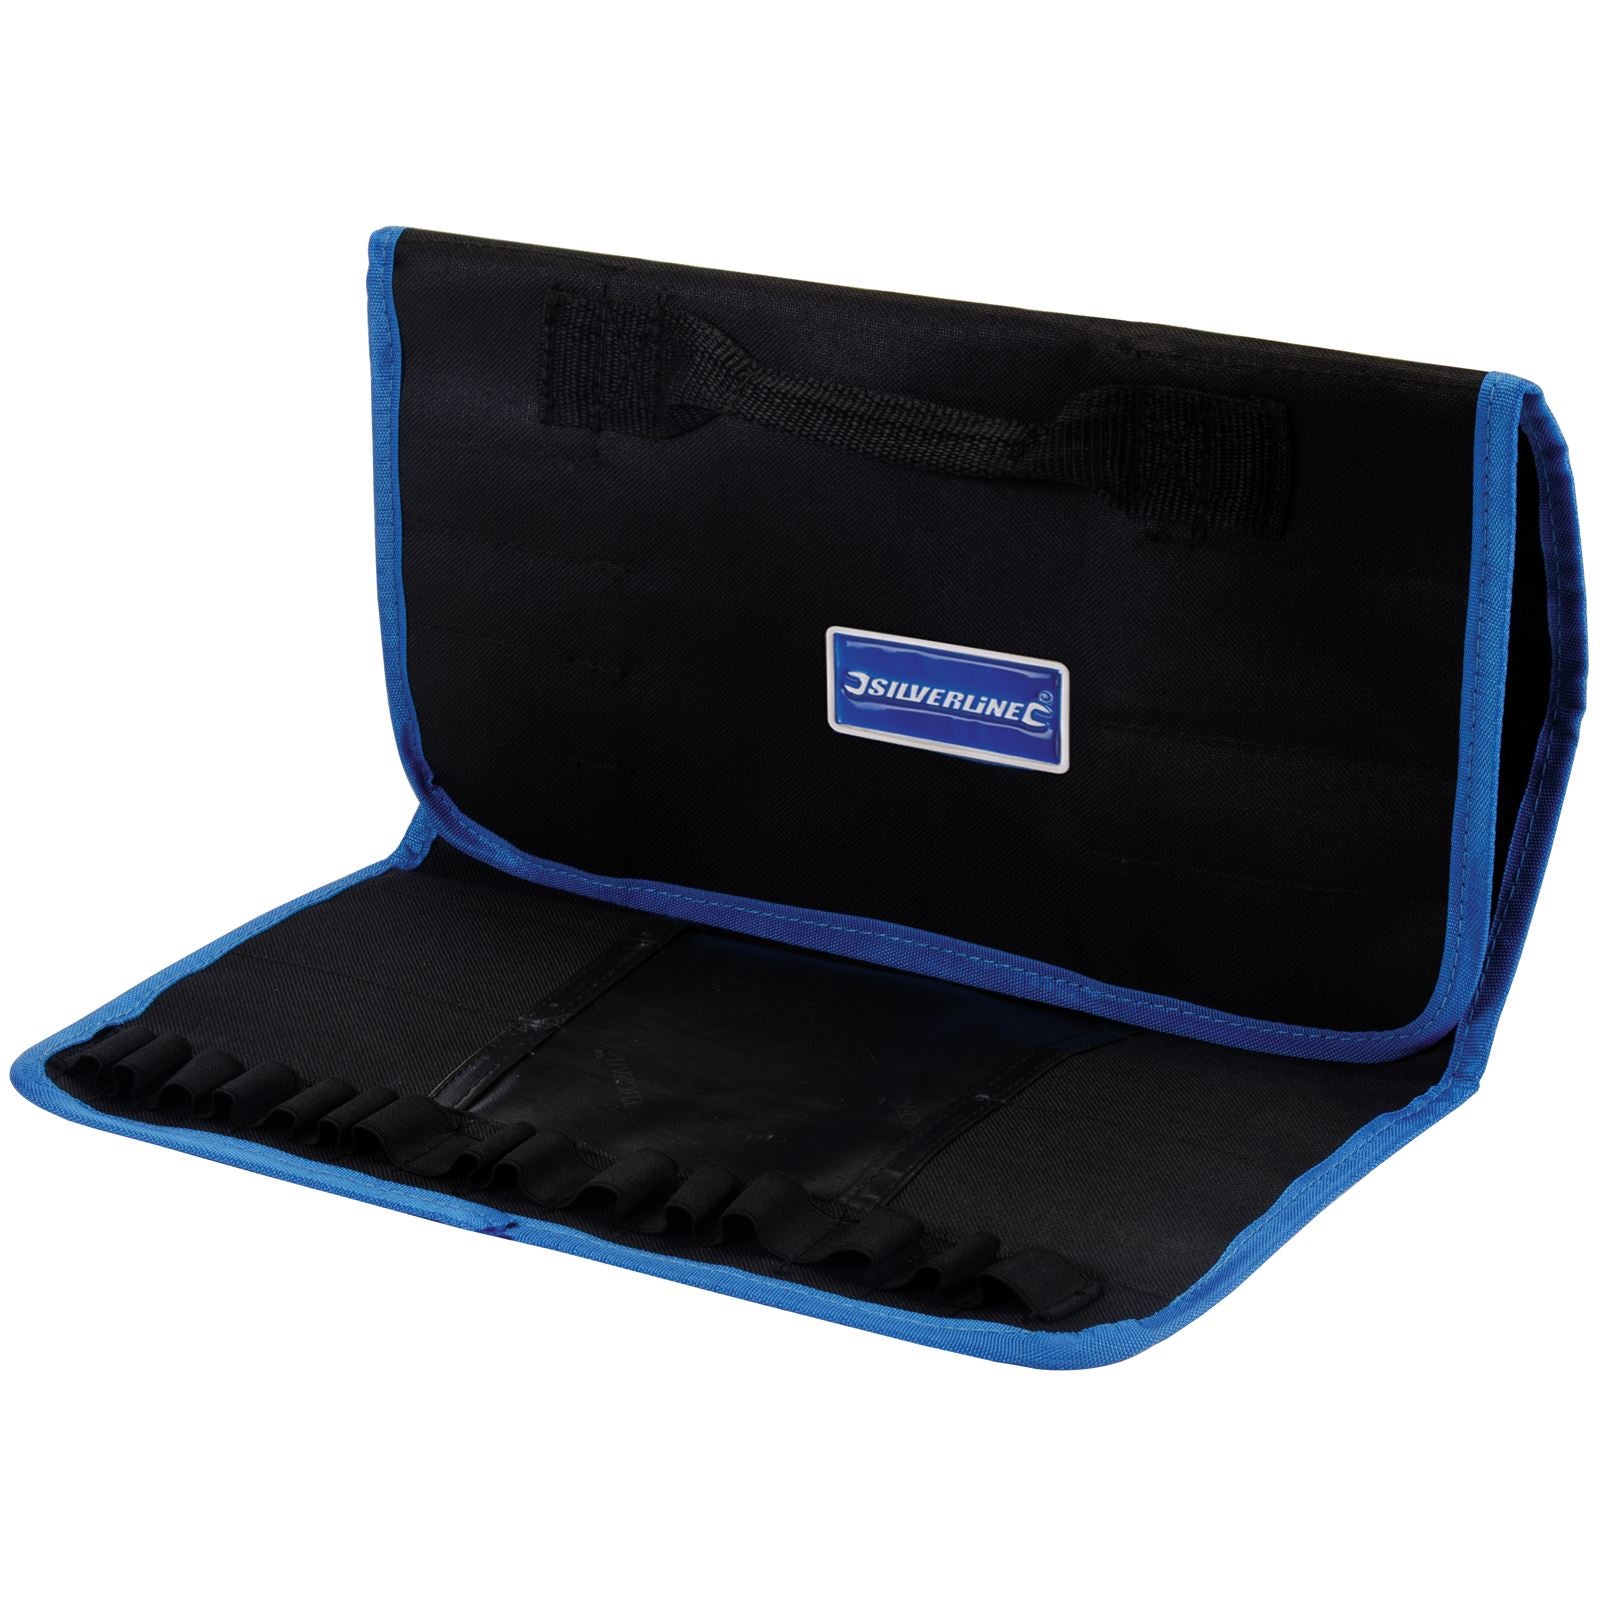 Silverline Expert Tool Roll 760x300mm Carry Bag Multi Pocket Strong Handles